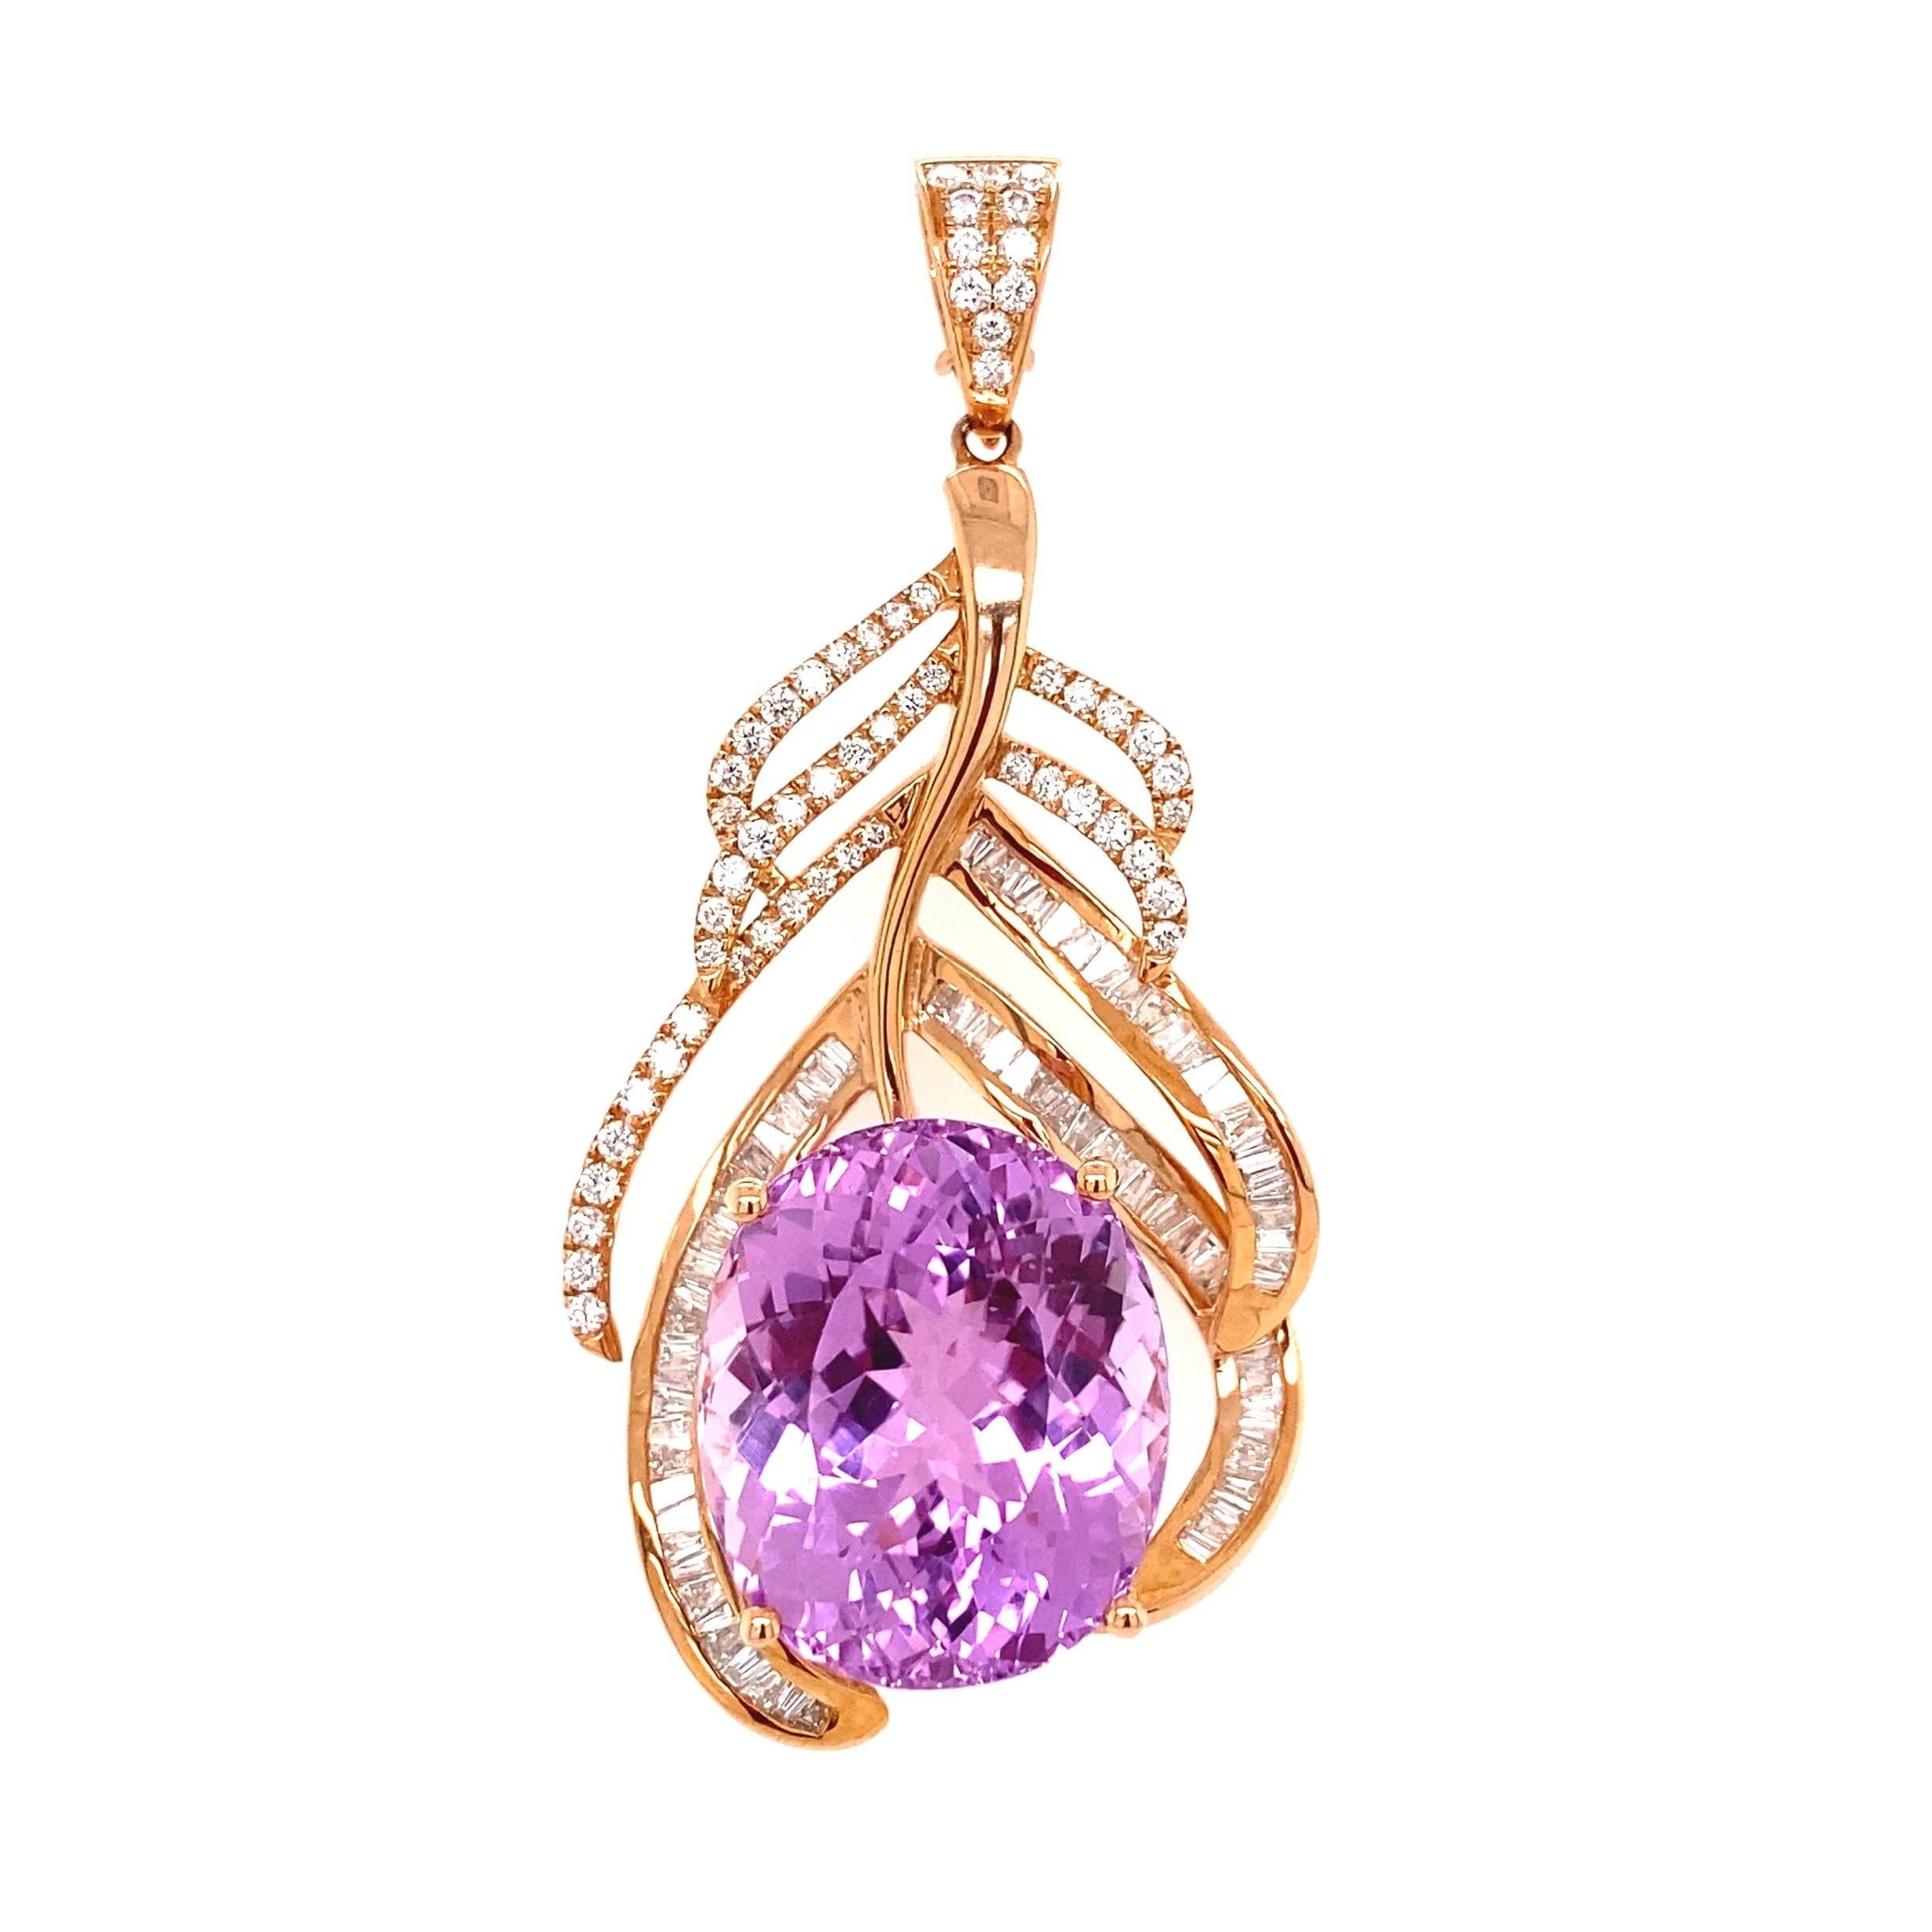 Simply Beautiful! Finely detailed Gold Oval Dark Kunzite and Diamond Pendant, center securely nestled with a Hand set 29.32 Carat Oval Kunzite, accented with Diamonds weighing approx. 2.00tcw. Fabulous design! Pendant measures approx. 1.65”.